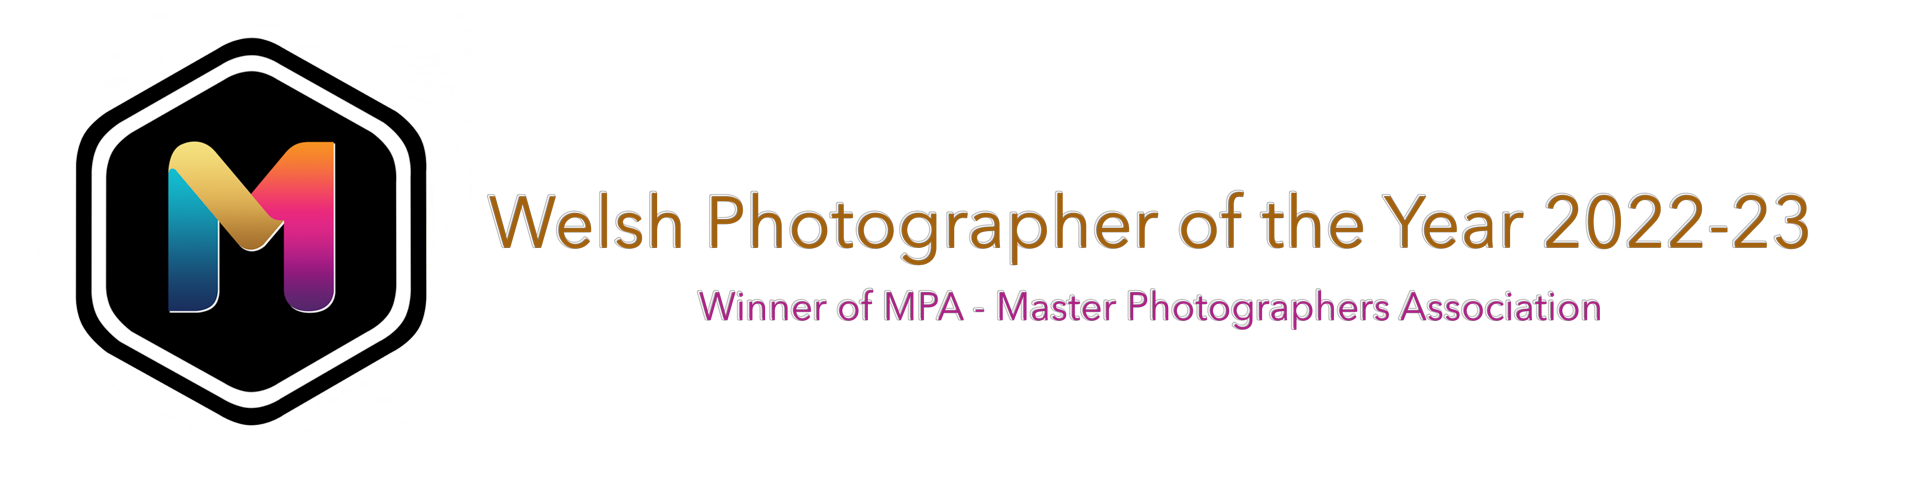 MPA-Photographer of the Year 2022-1.png